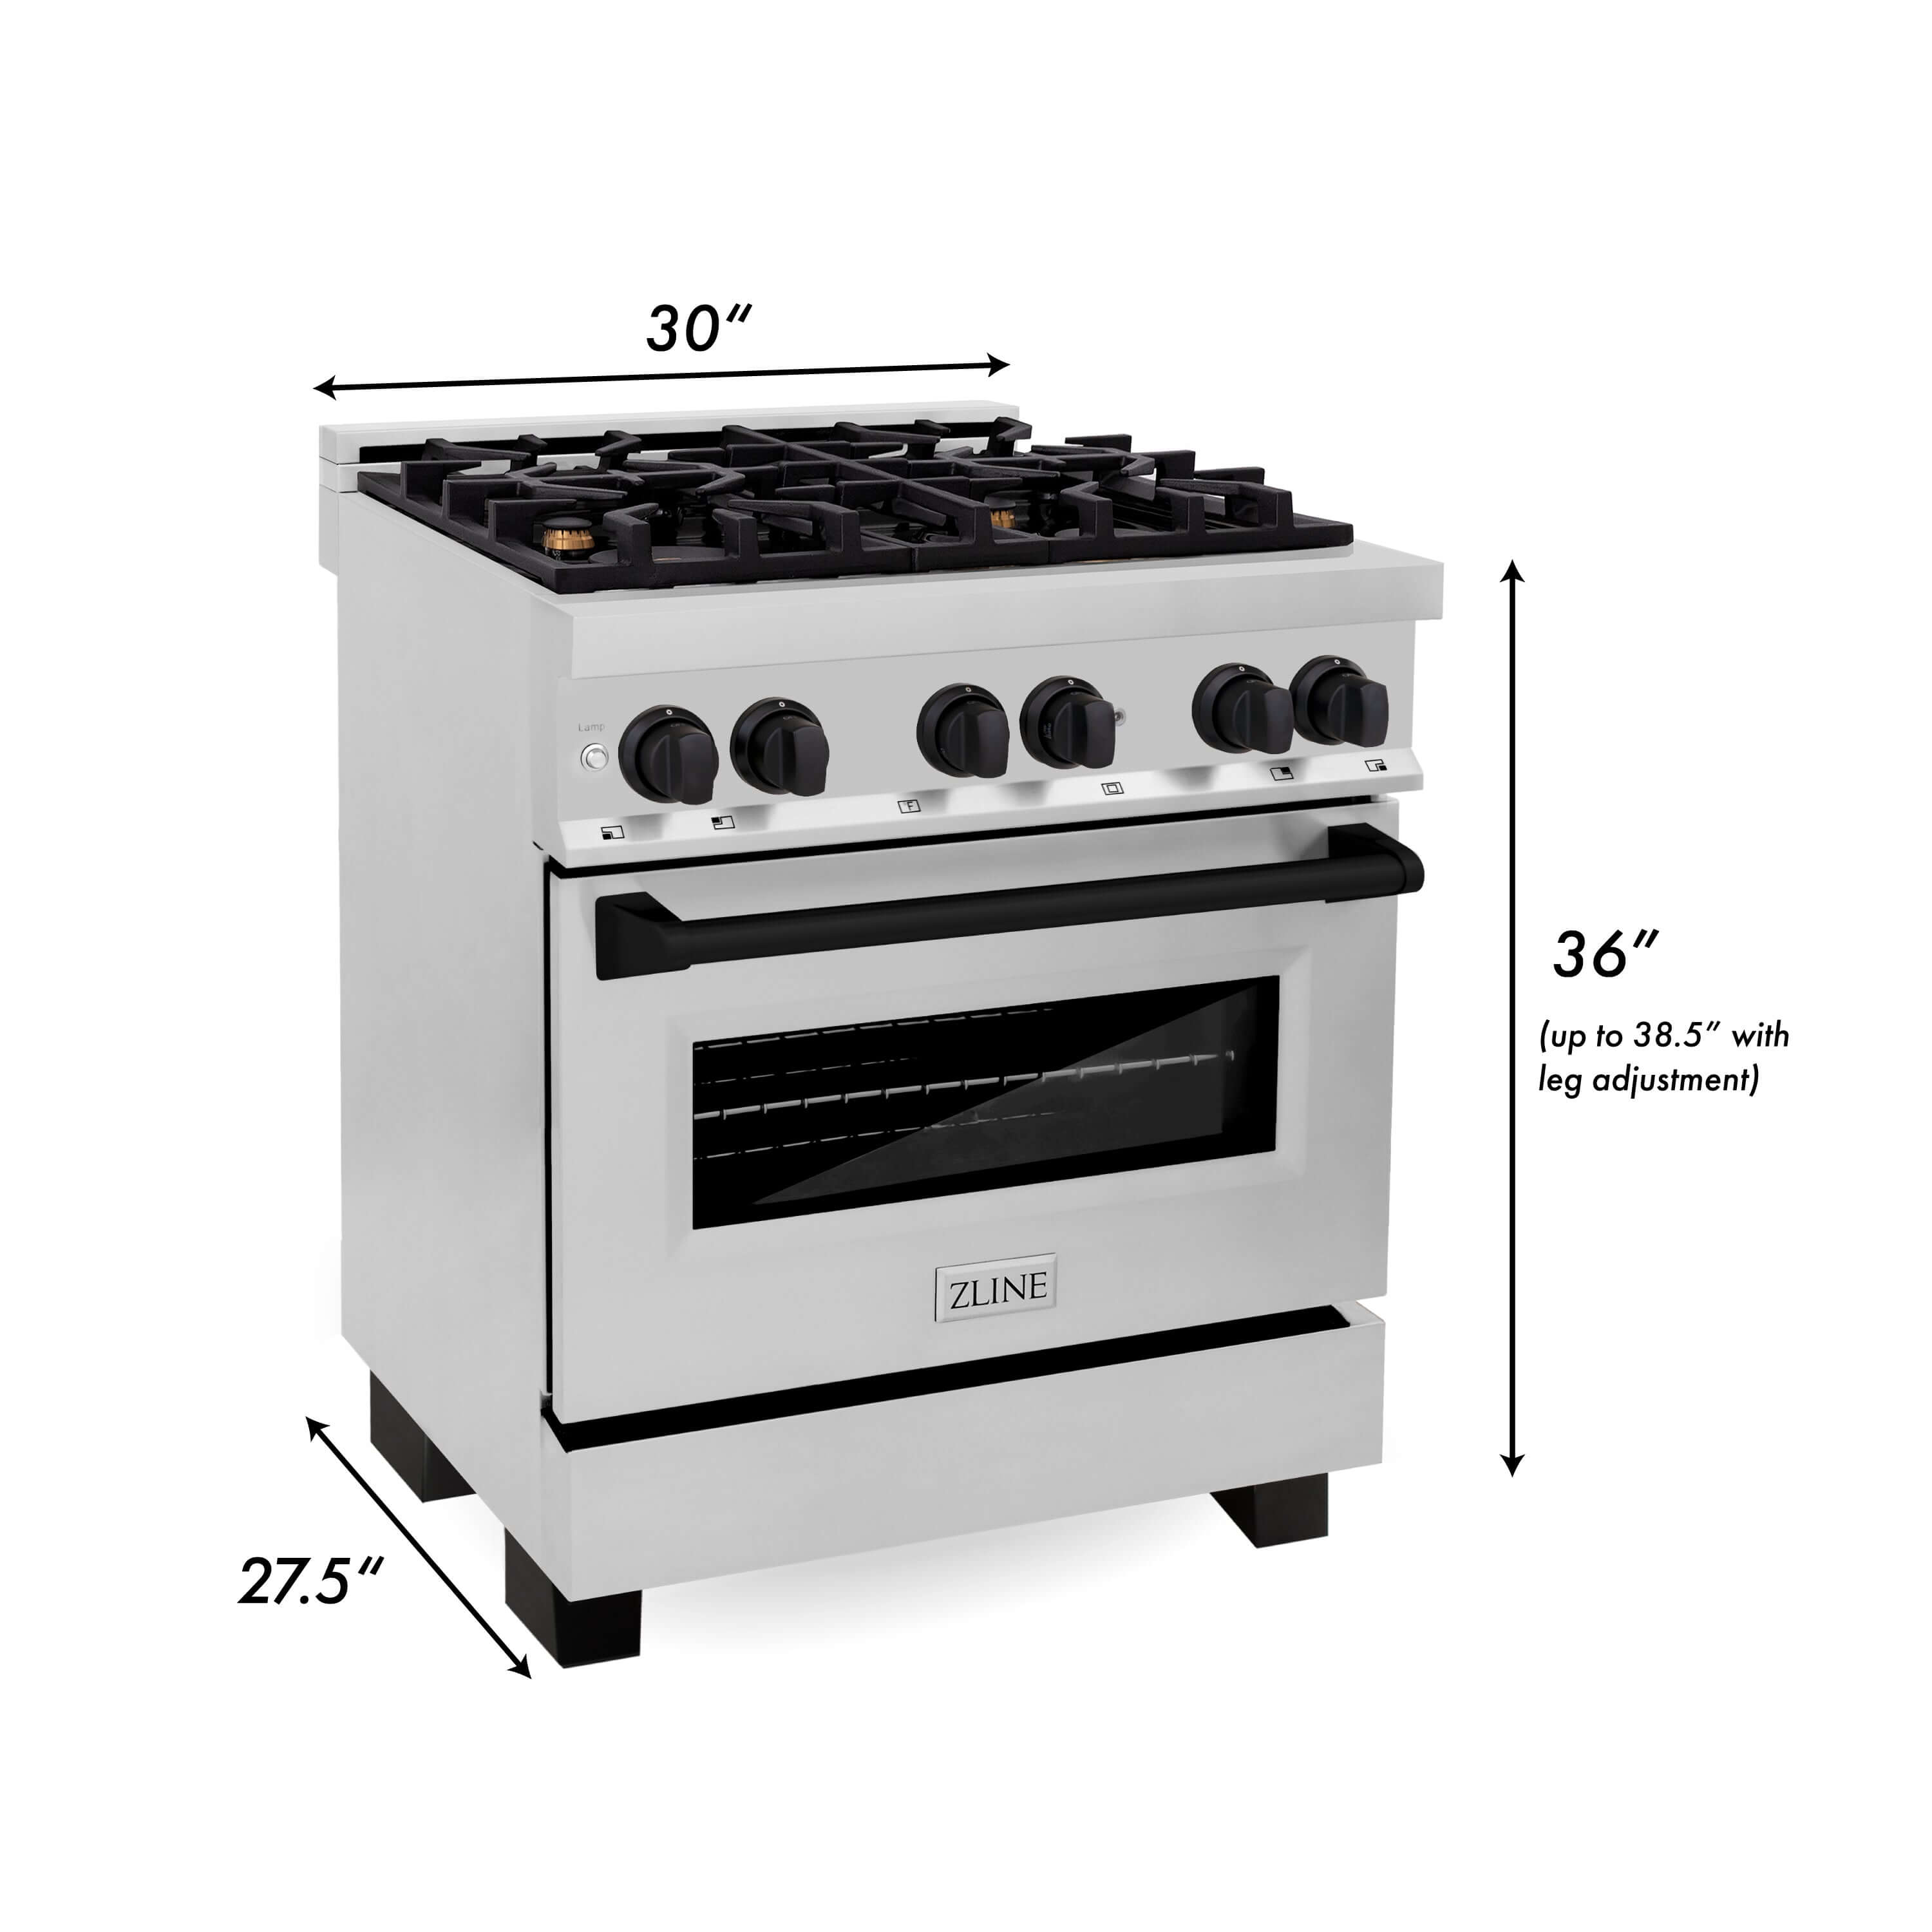 ZLINE Autograph Edition 30 in. 4.0 cu. ft. Dual Fuel Range with Gas Stove and Electric Oven in Stainless Steel with Accents (RAZ-30) Dimensions